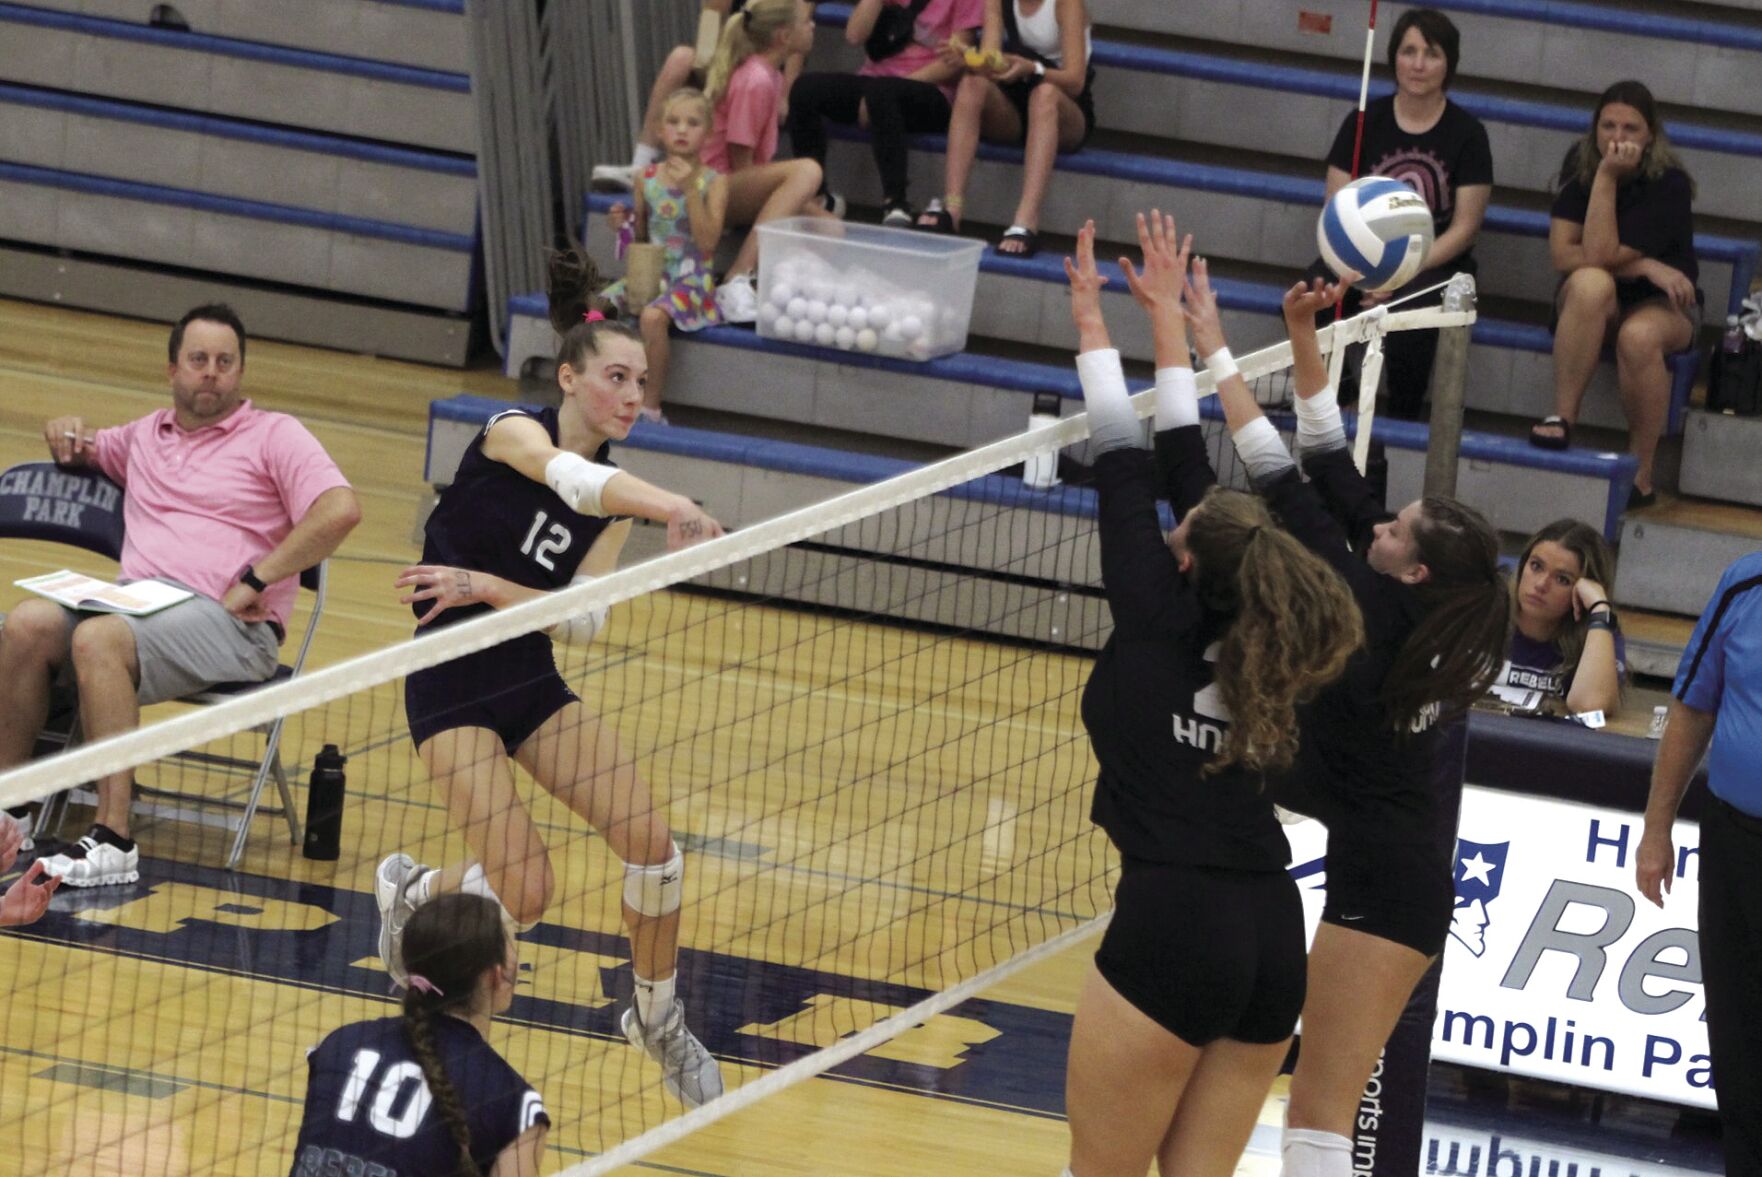 Champlin Park volleyball earns 2 wins, stays undefeated in conference